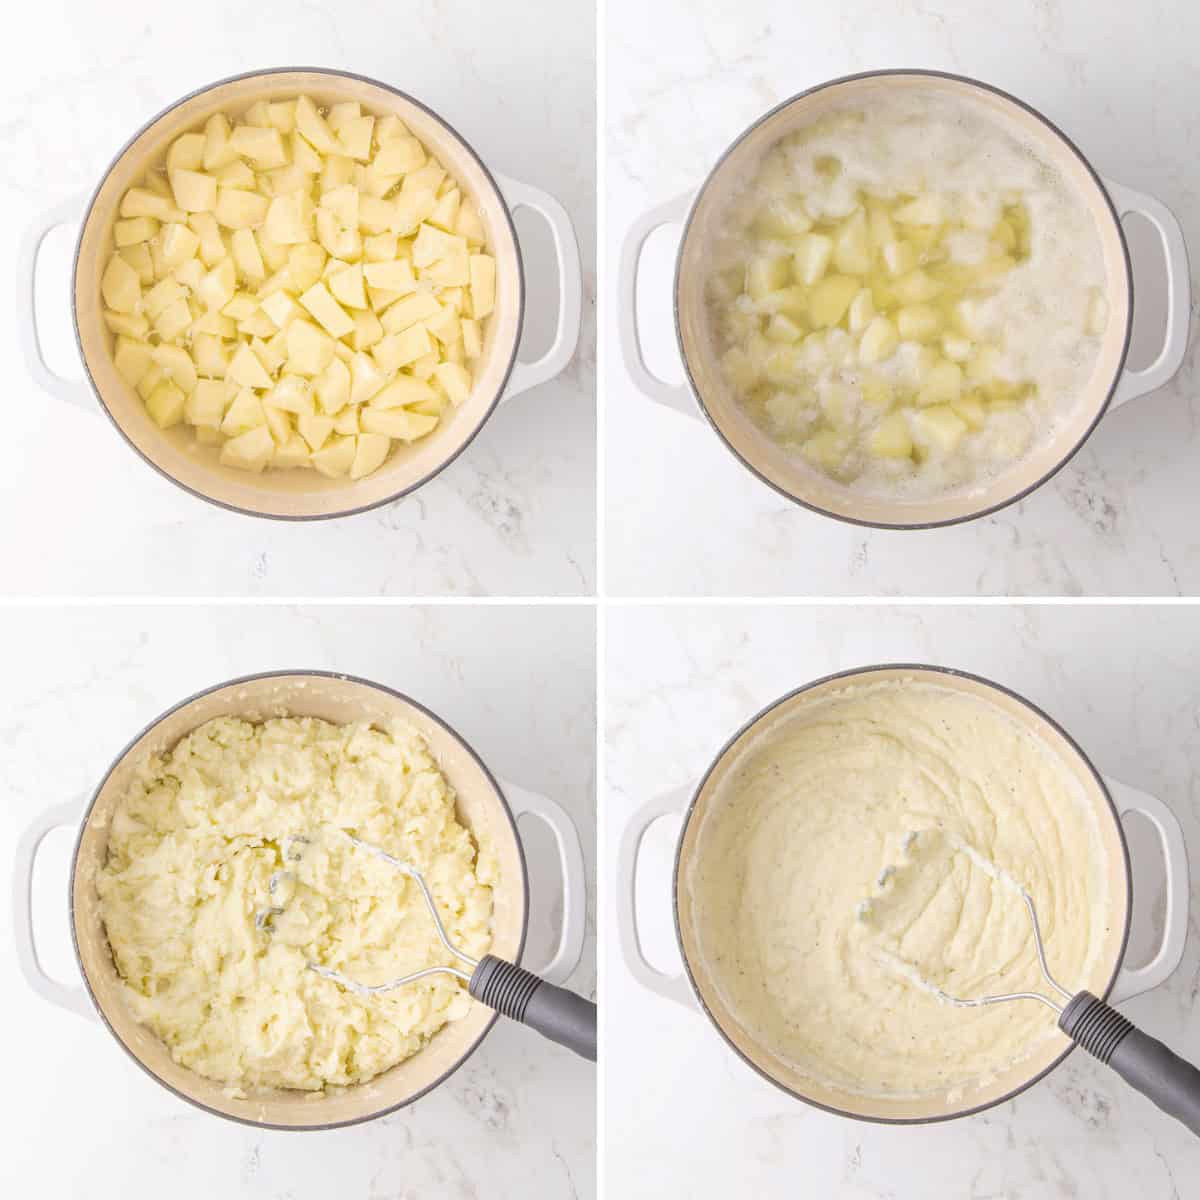 Step by step photos showing how to prepare make-ahead mashed potatoes.